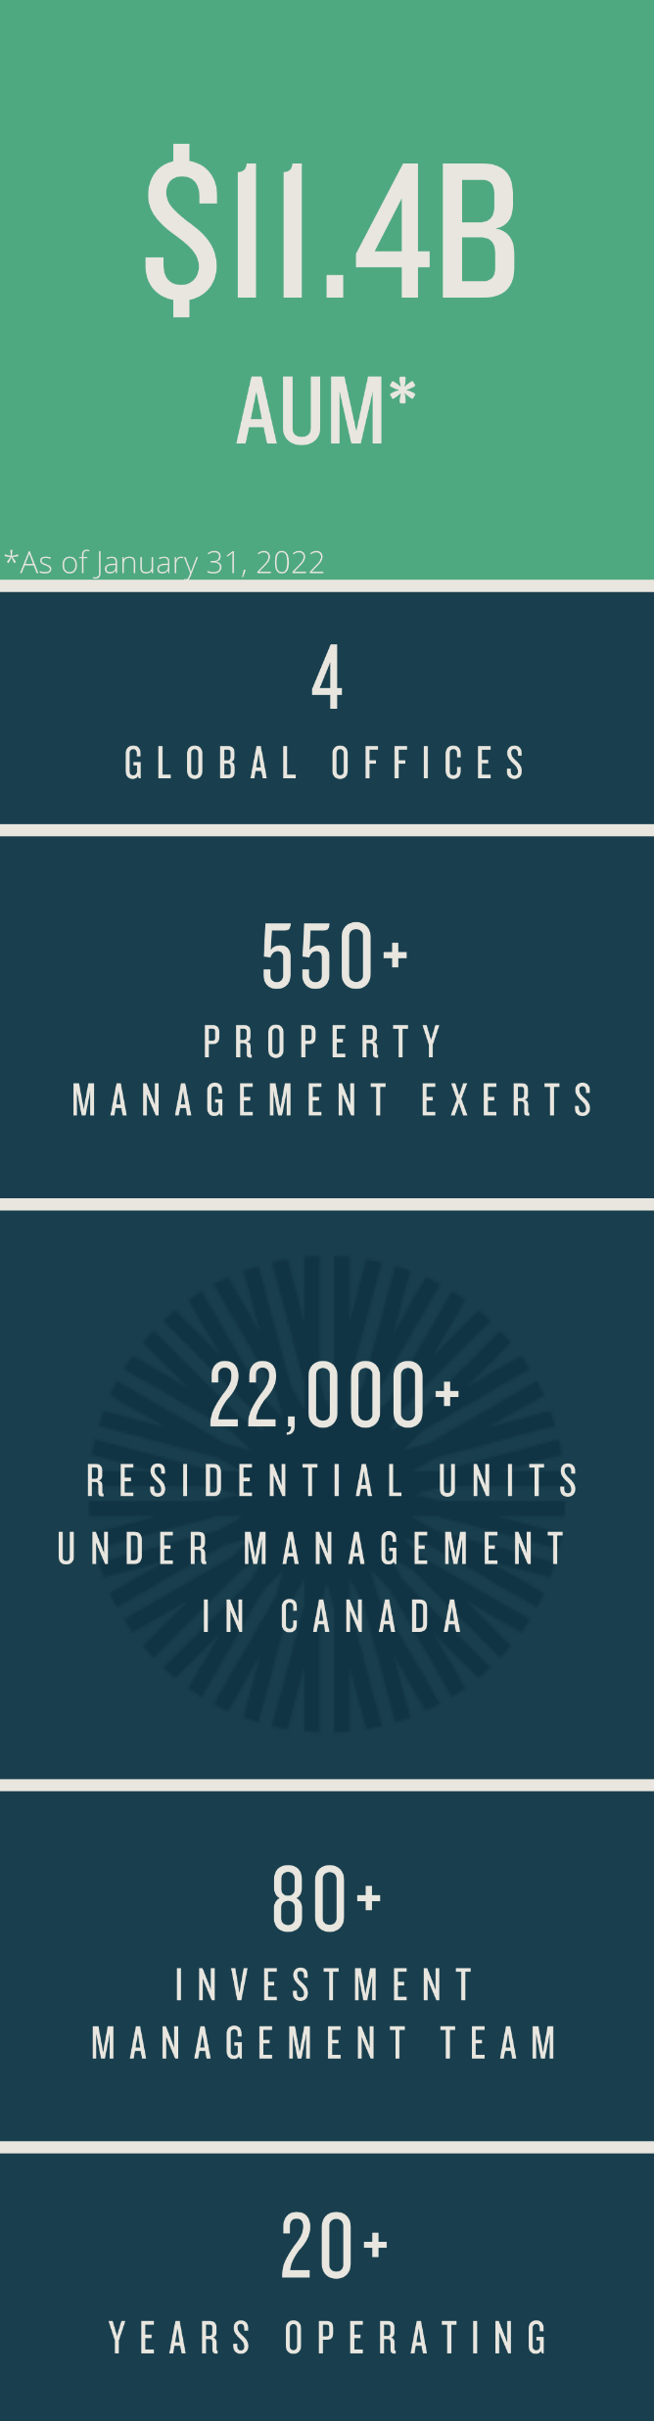 Alt text: AUM 11.1 Billion; 4 Global offices, 20+ year operating; Fully Integrated platform, 80+ investment management team; 550+ property management experts; 22,000+ residential units under management in Canada; as of December 31, 2021.